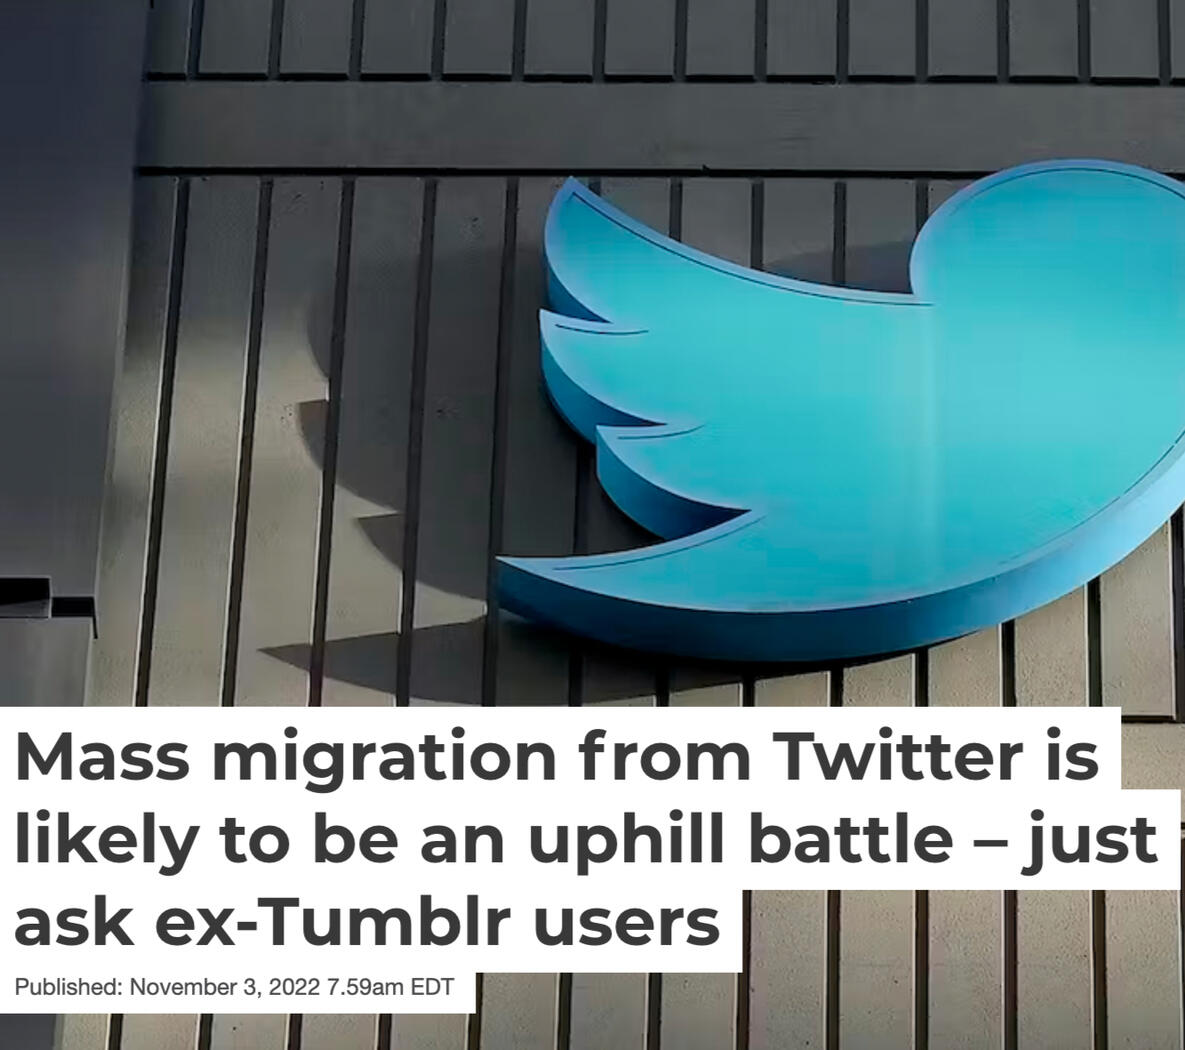 a screenshot of an op-ed with the title "Mass migration from Twitter is likely to be an uphill battle - just ask ex-Tumblr users"